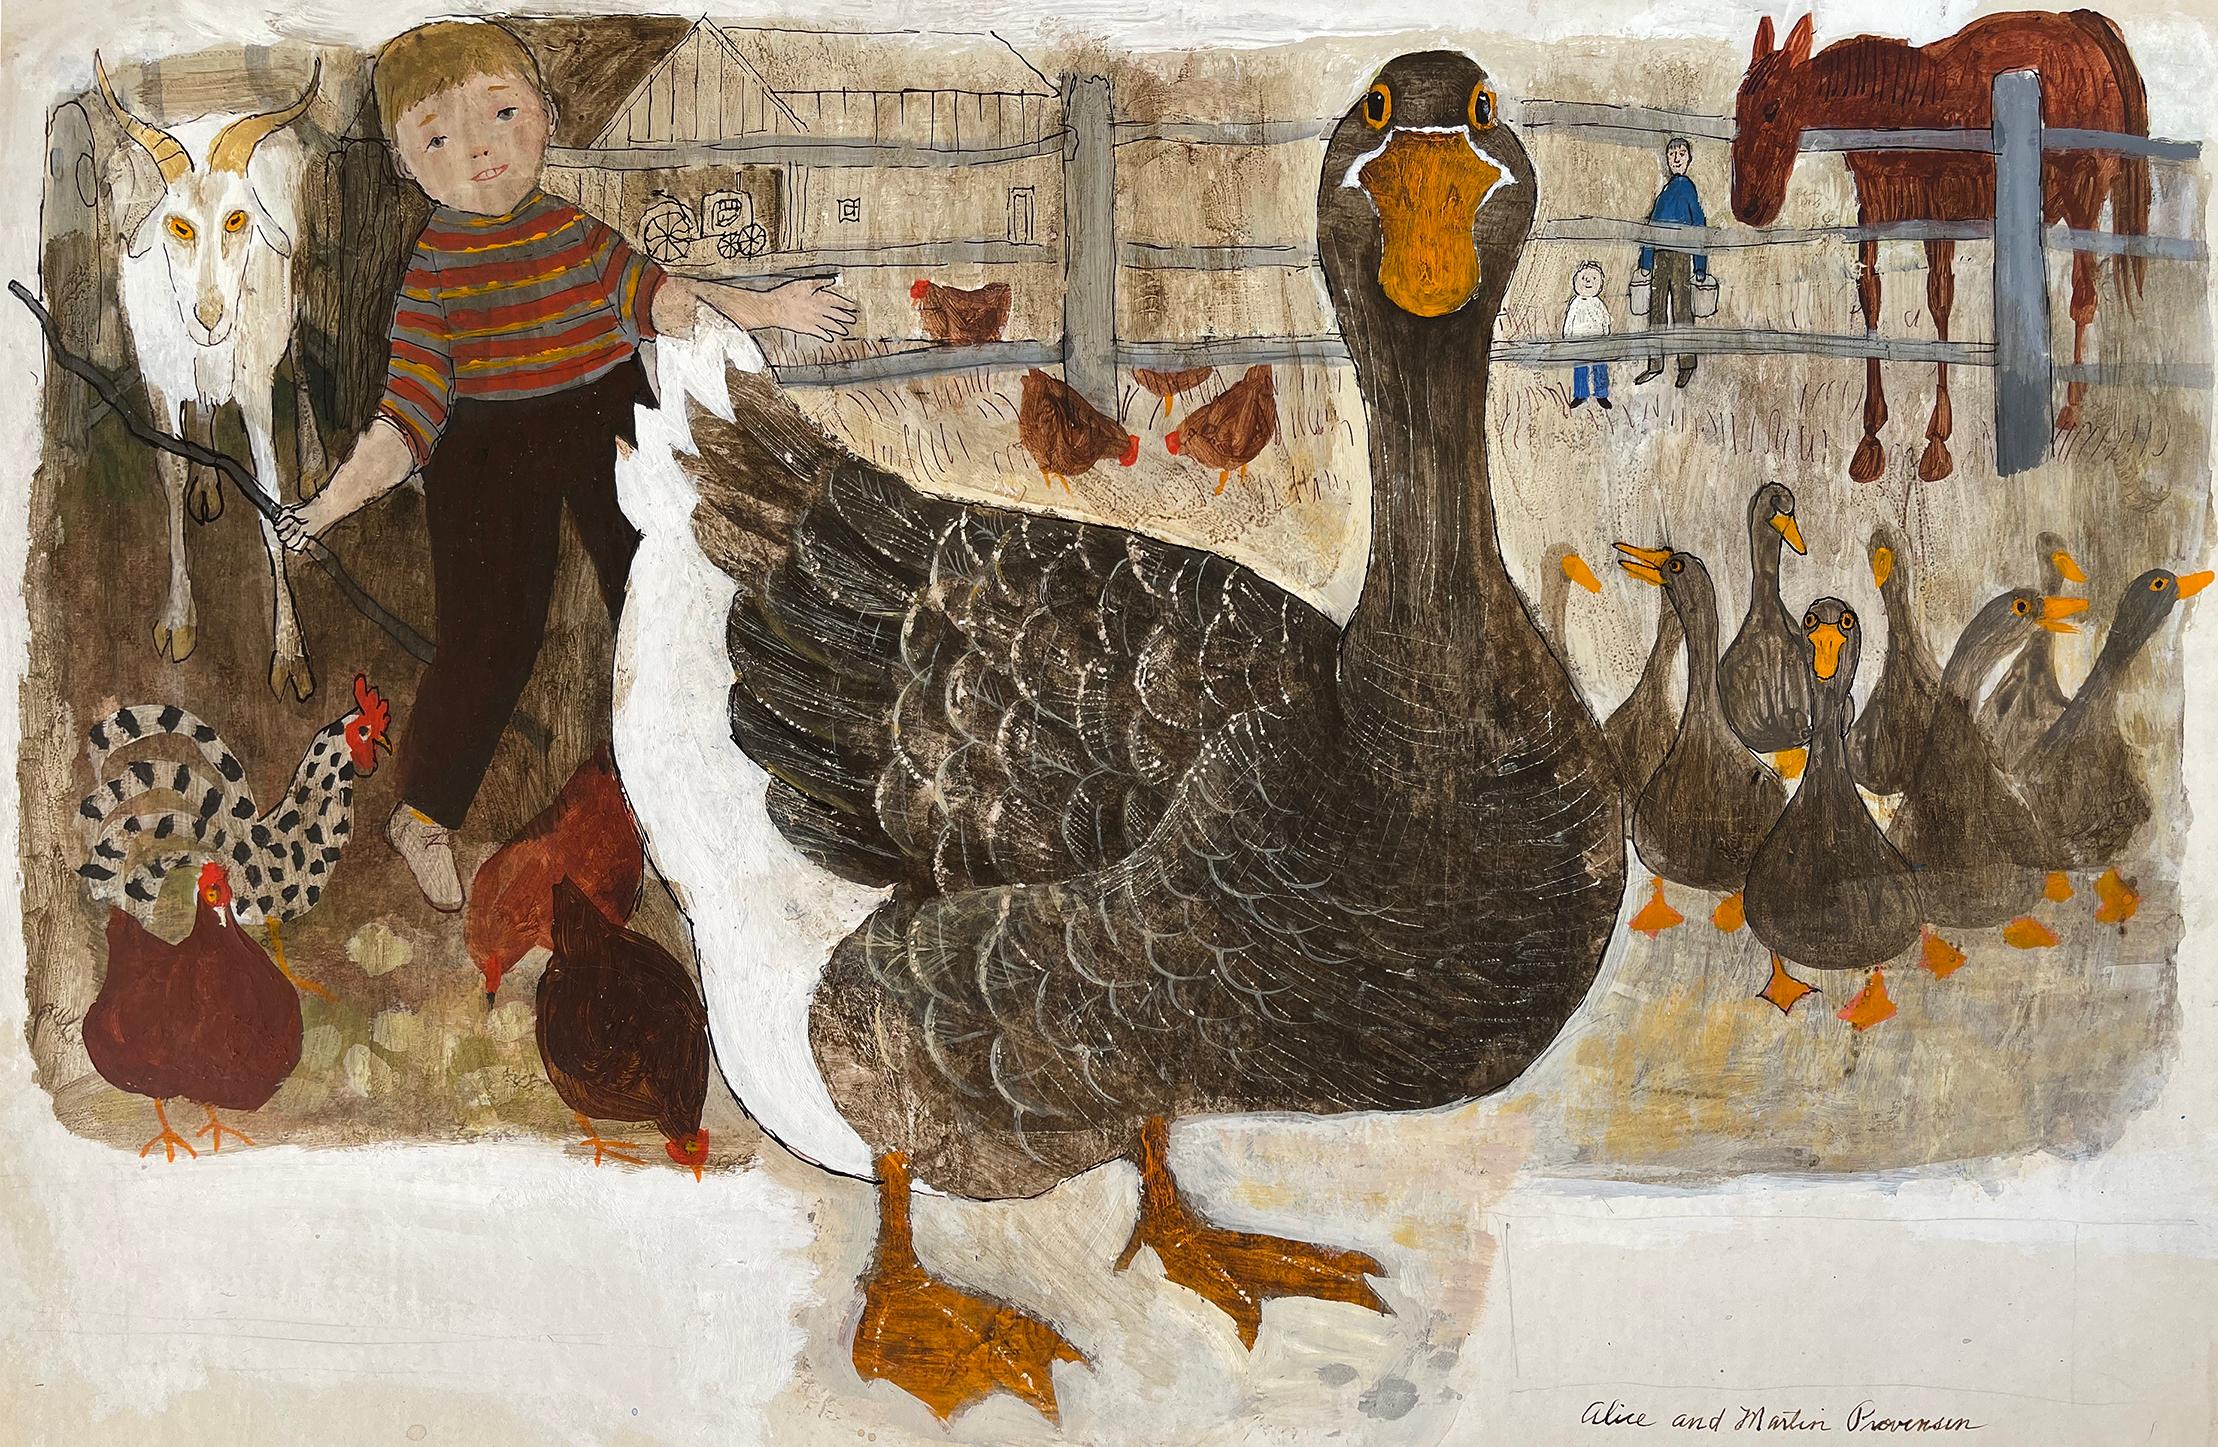 ALICE and MARTIN PROVENSEN - Duck in Farm with Horse, Goat and